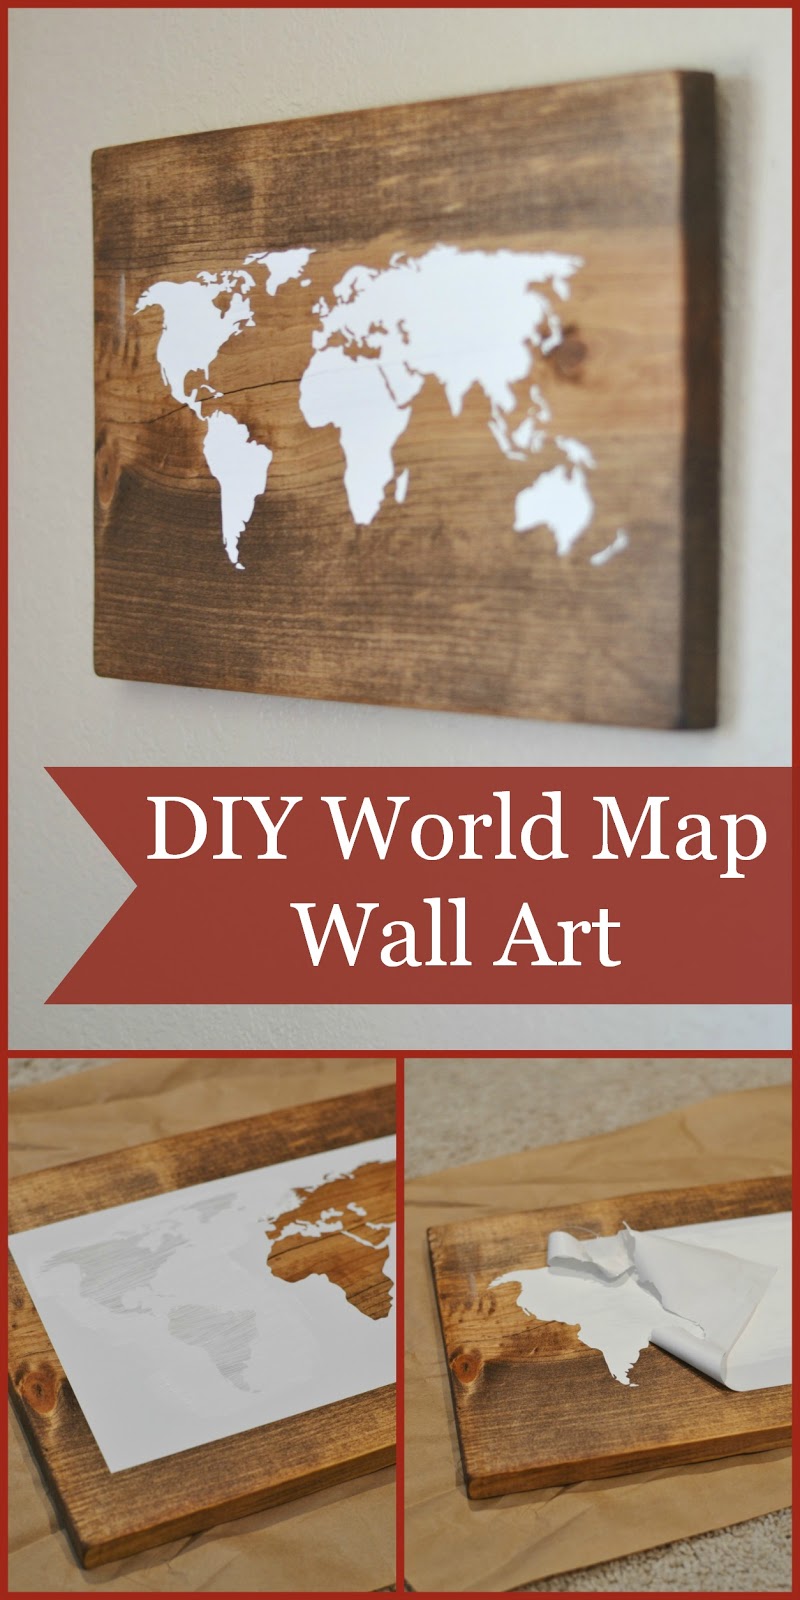 18 Marvelous DIY Wall Art Designs That Will Beautify Your Home Decor